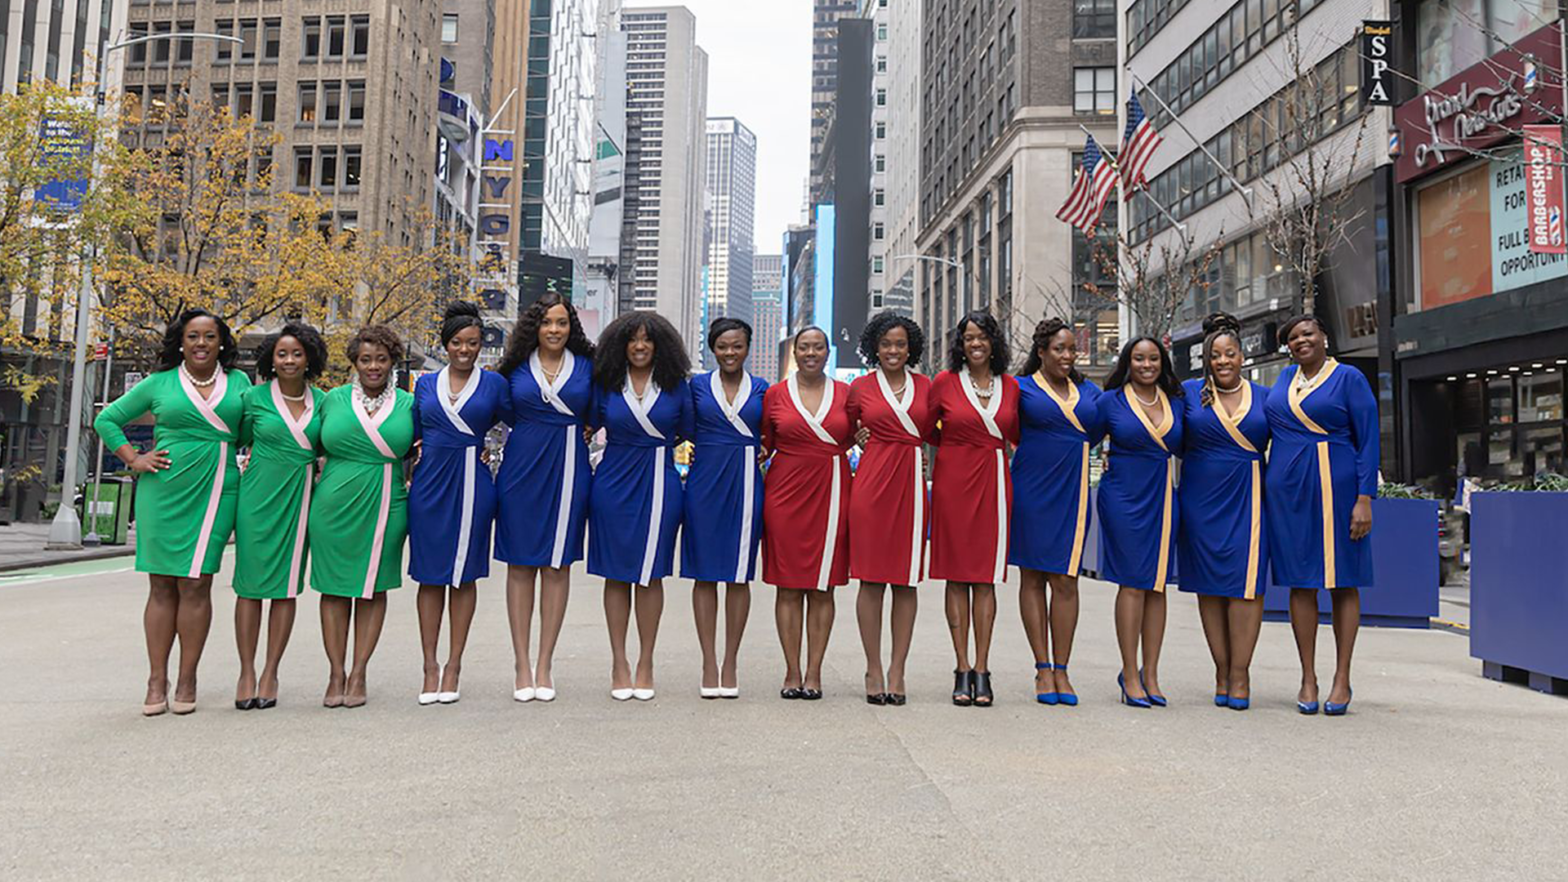 Black Women Are Behind A Macy's Line Designed For Divine Nine Sororities That's Projected To Hit $10M In Sales This Year